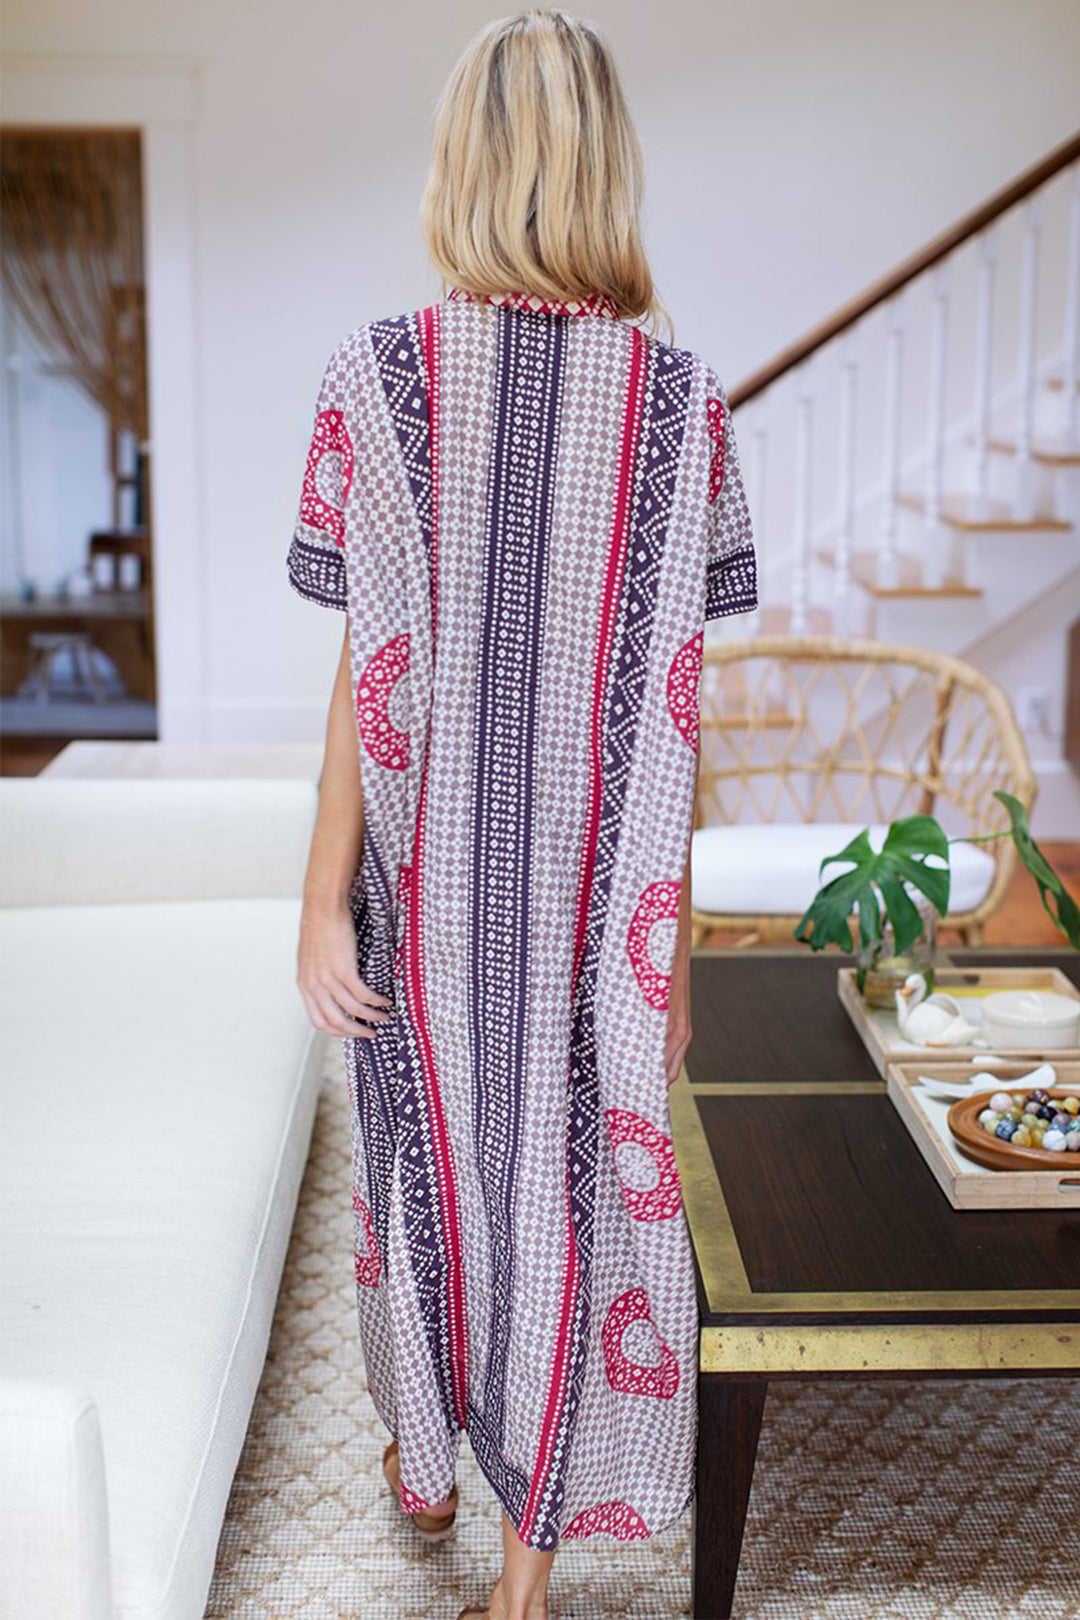 Emerson Fry Emerson Caftan beach cover-up in Butterfly Organic red and purple print at Inner Beach Co, Toronto, Canada